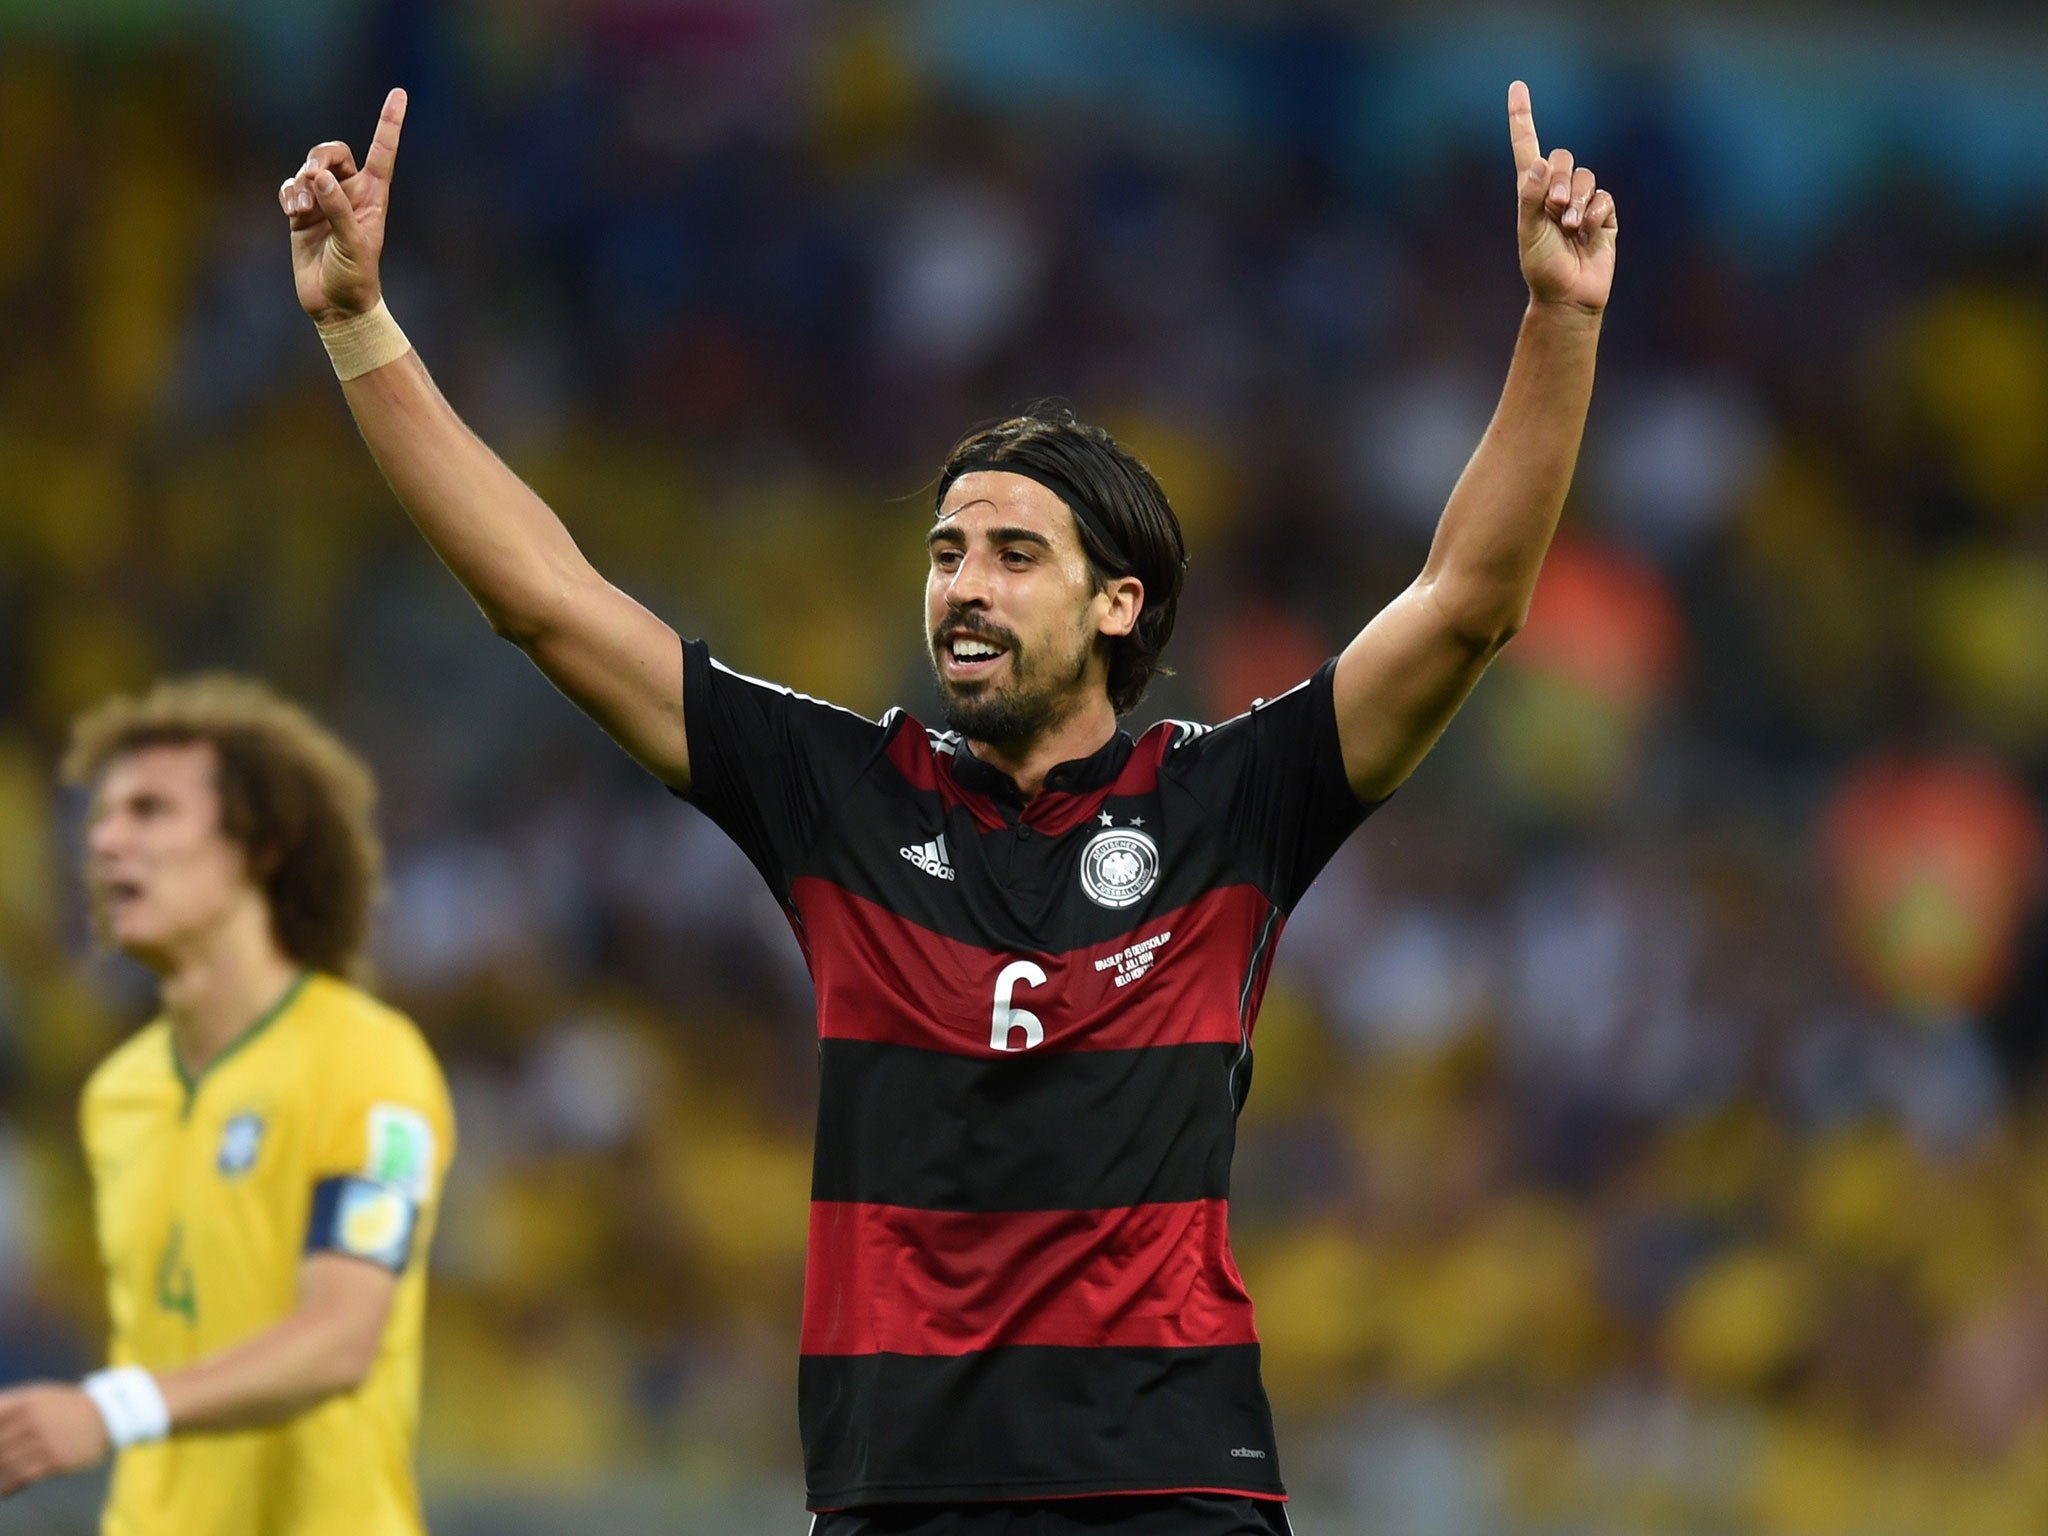 Khedira is being courted by Arsenal and Chelsea